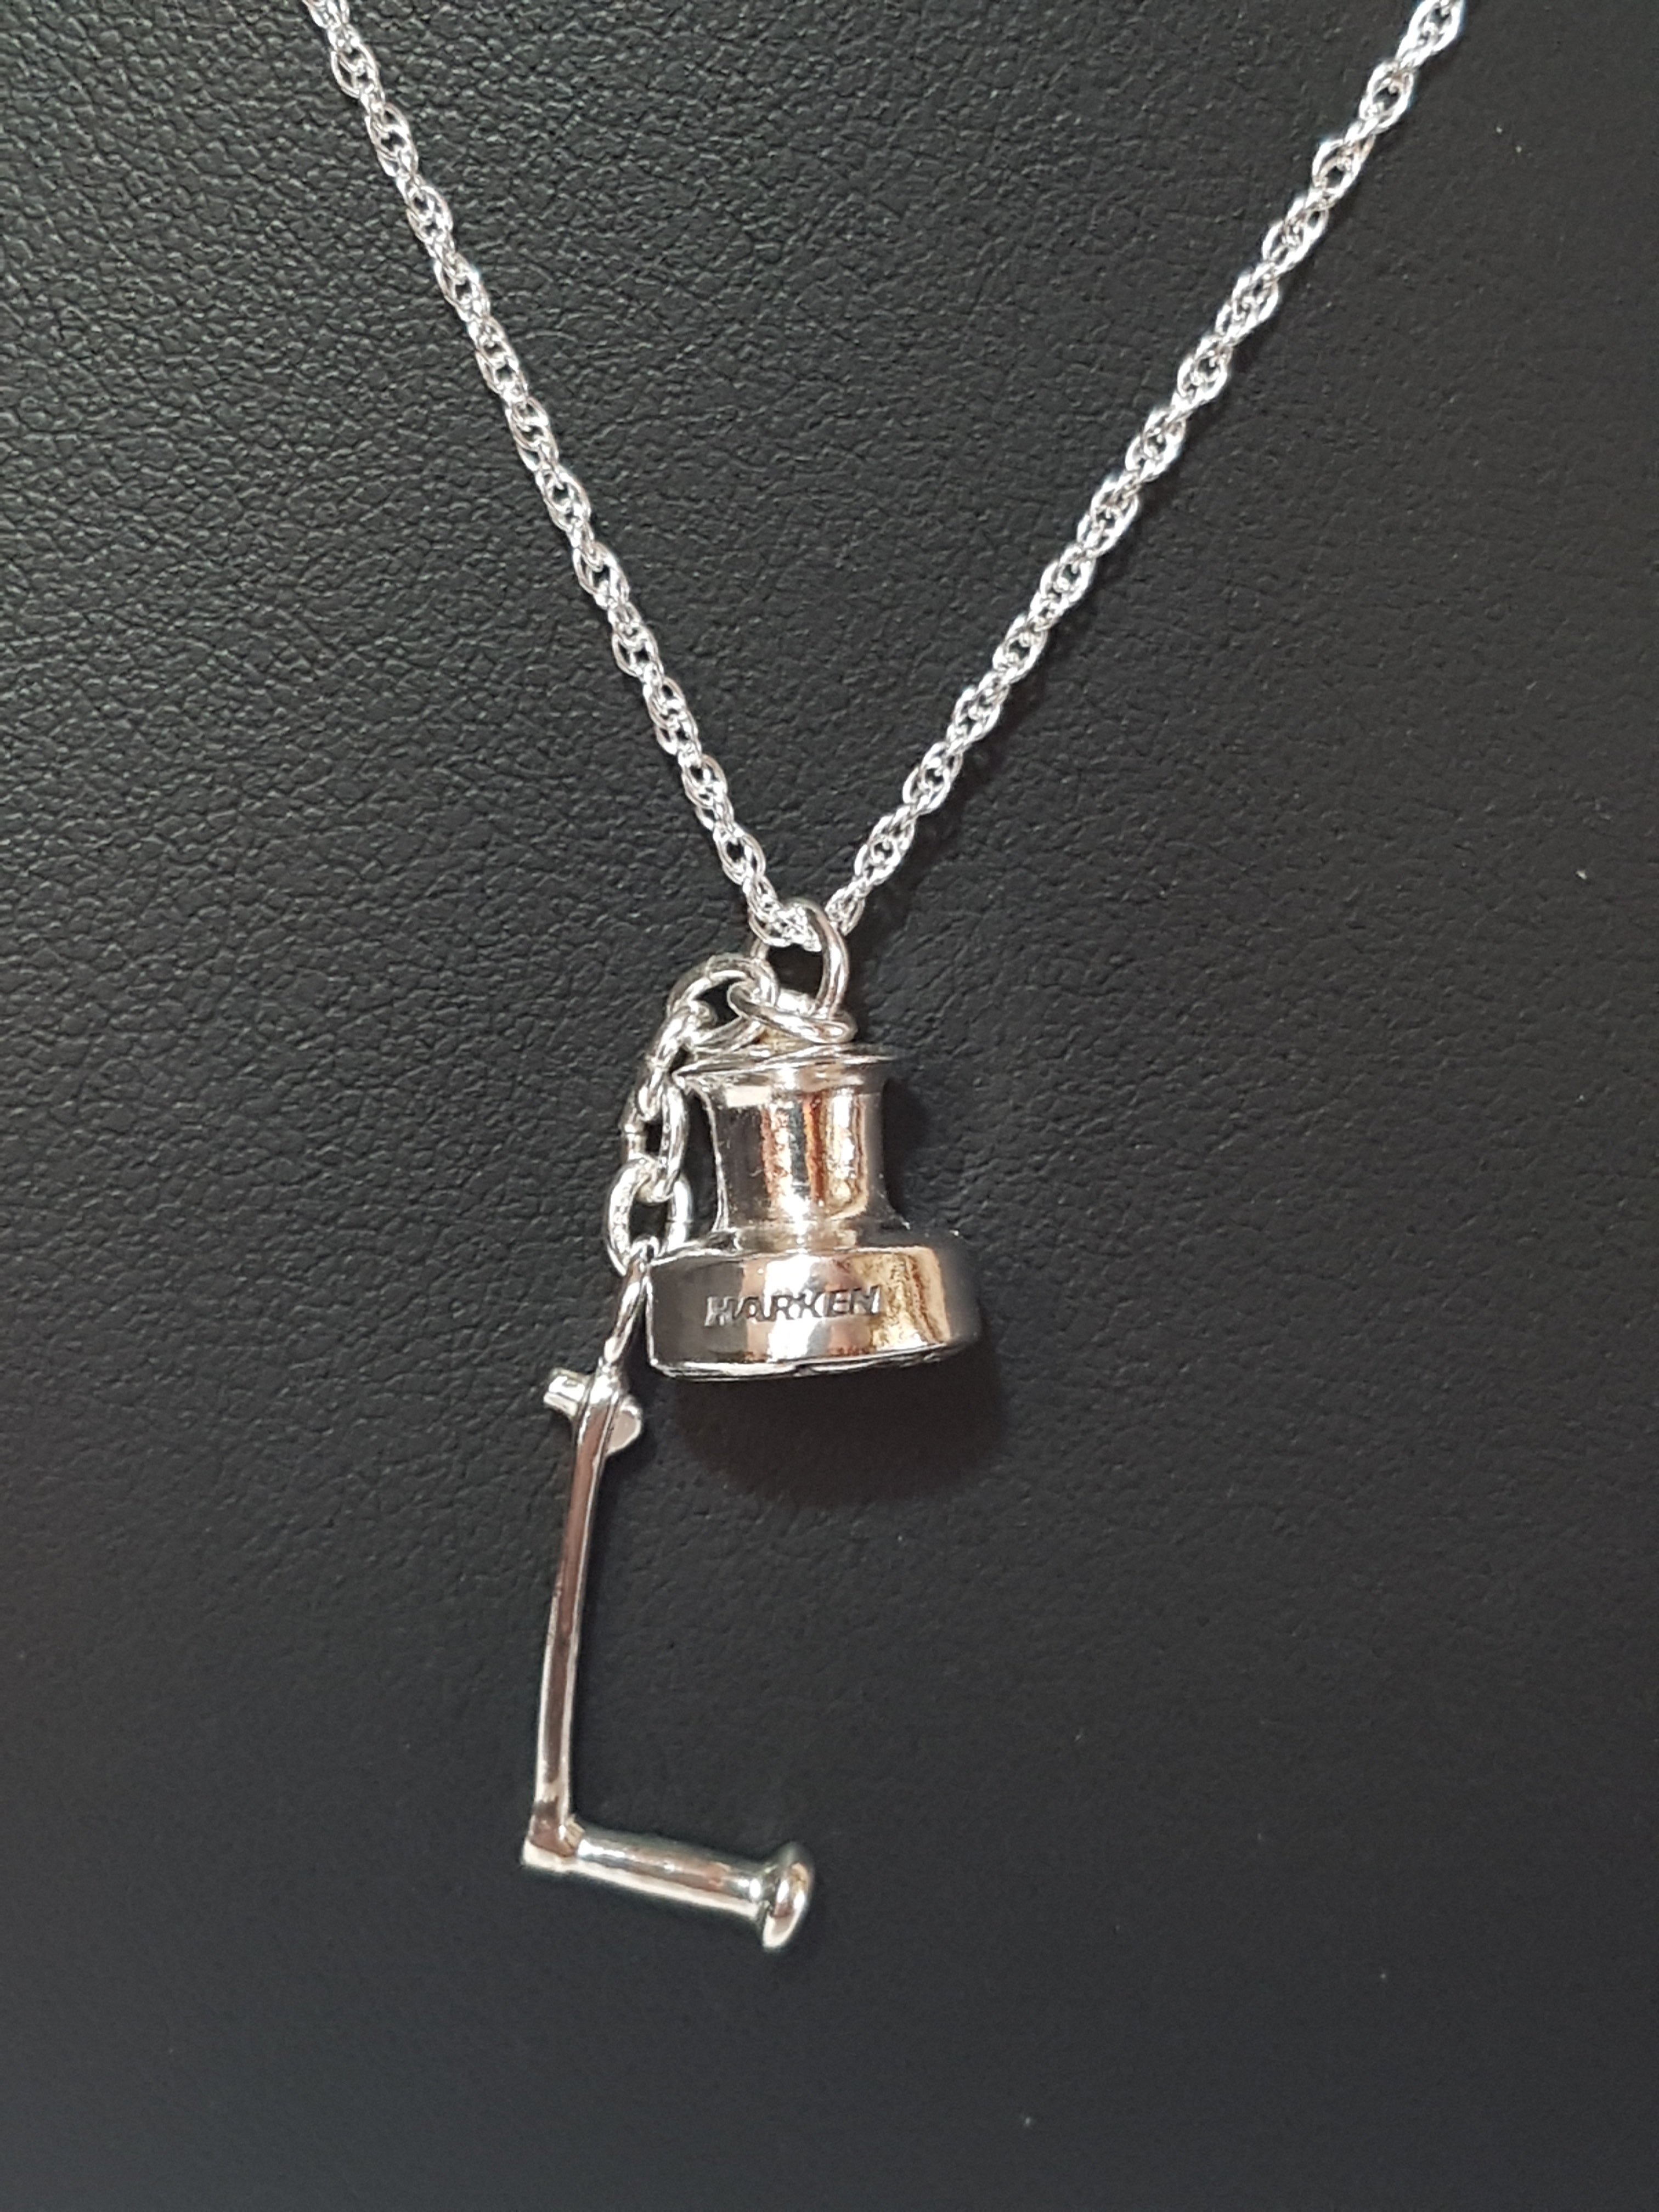 Silver Harken Winch and Winch Handle Necklace